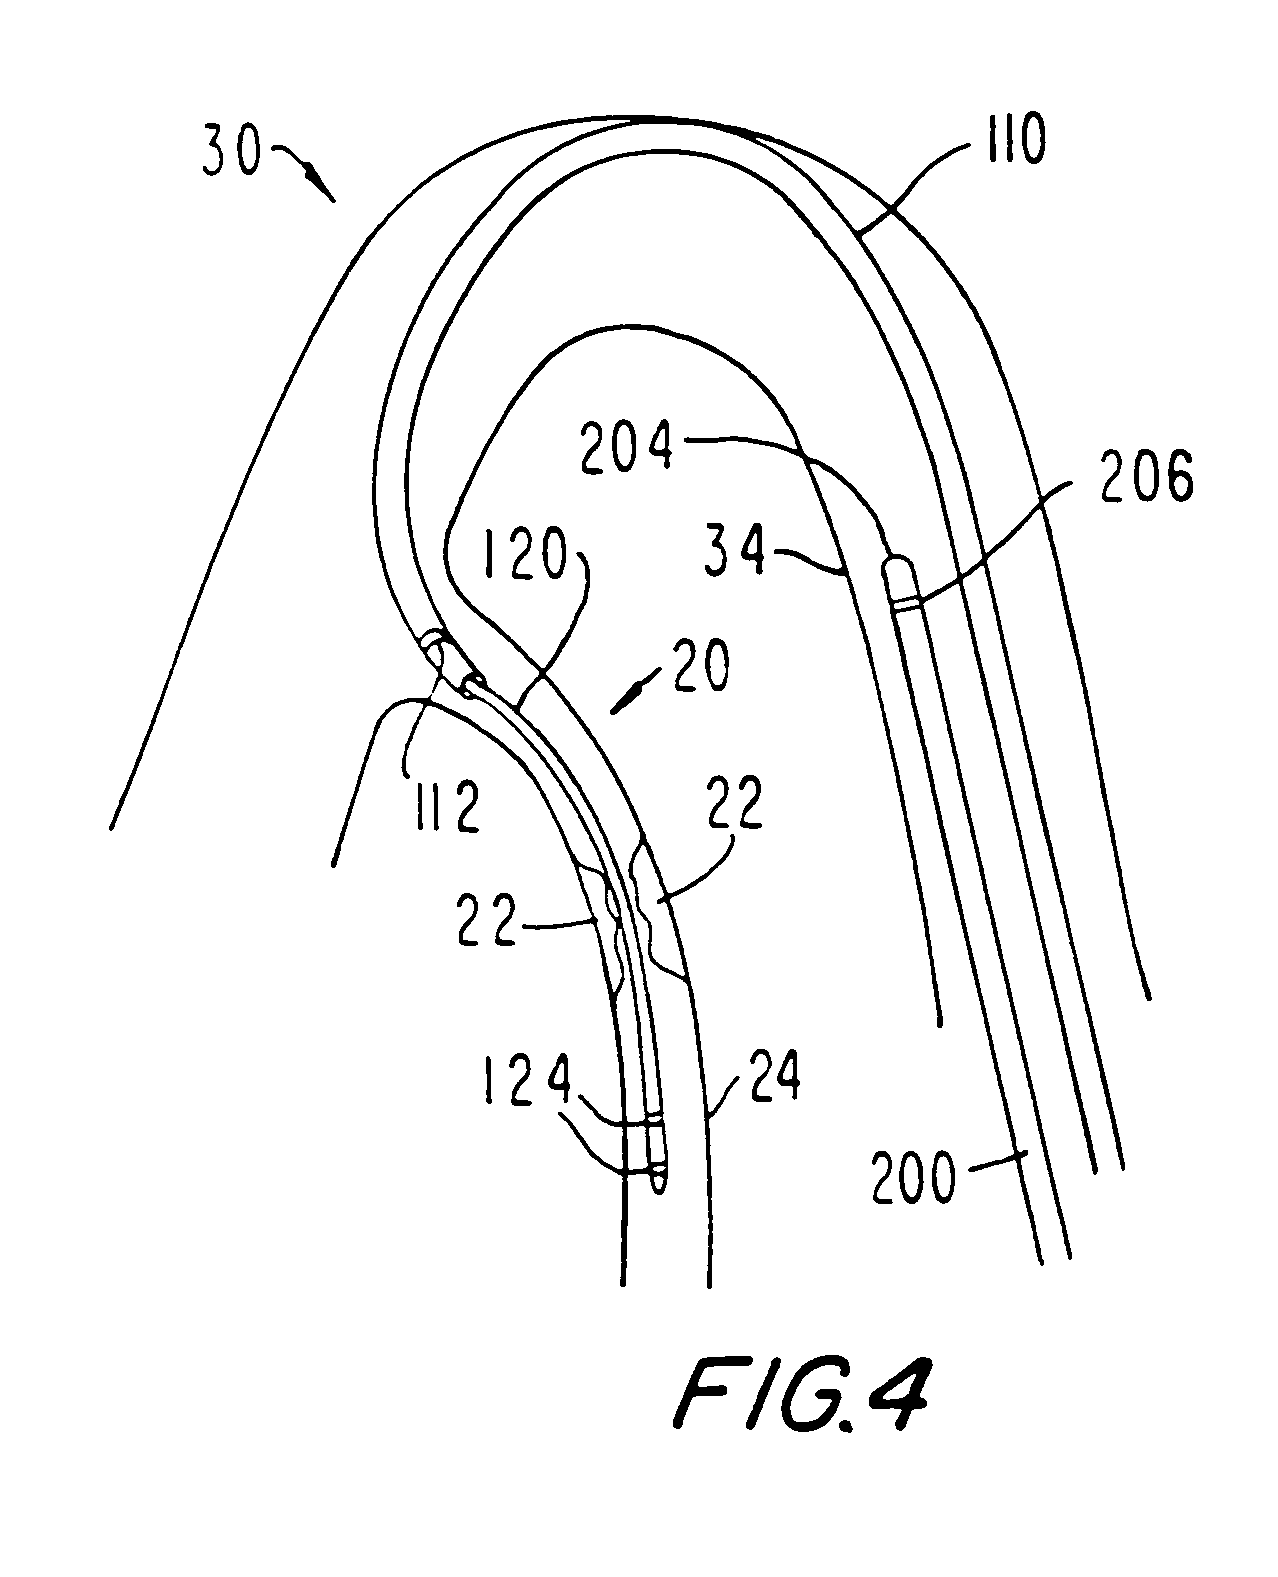 Medical grafting connectors and fasteners